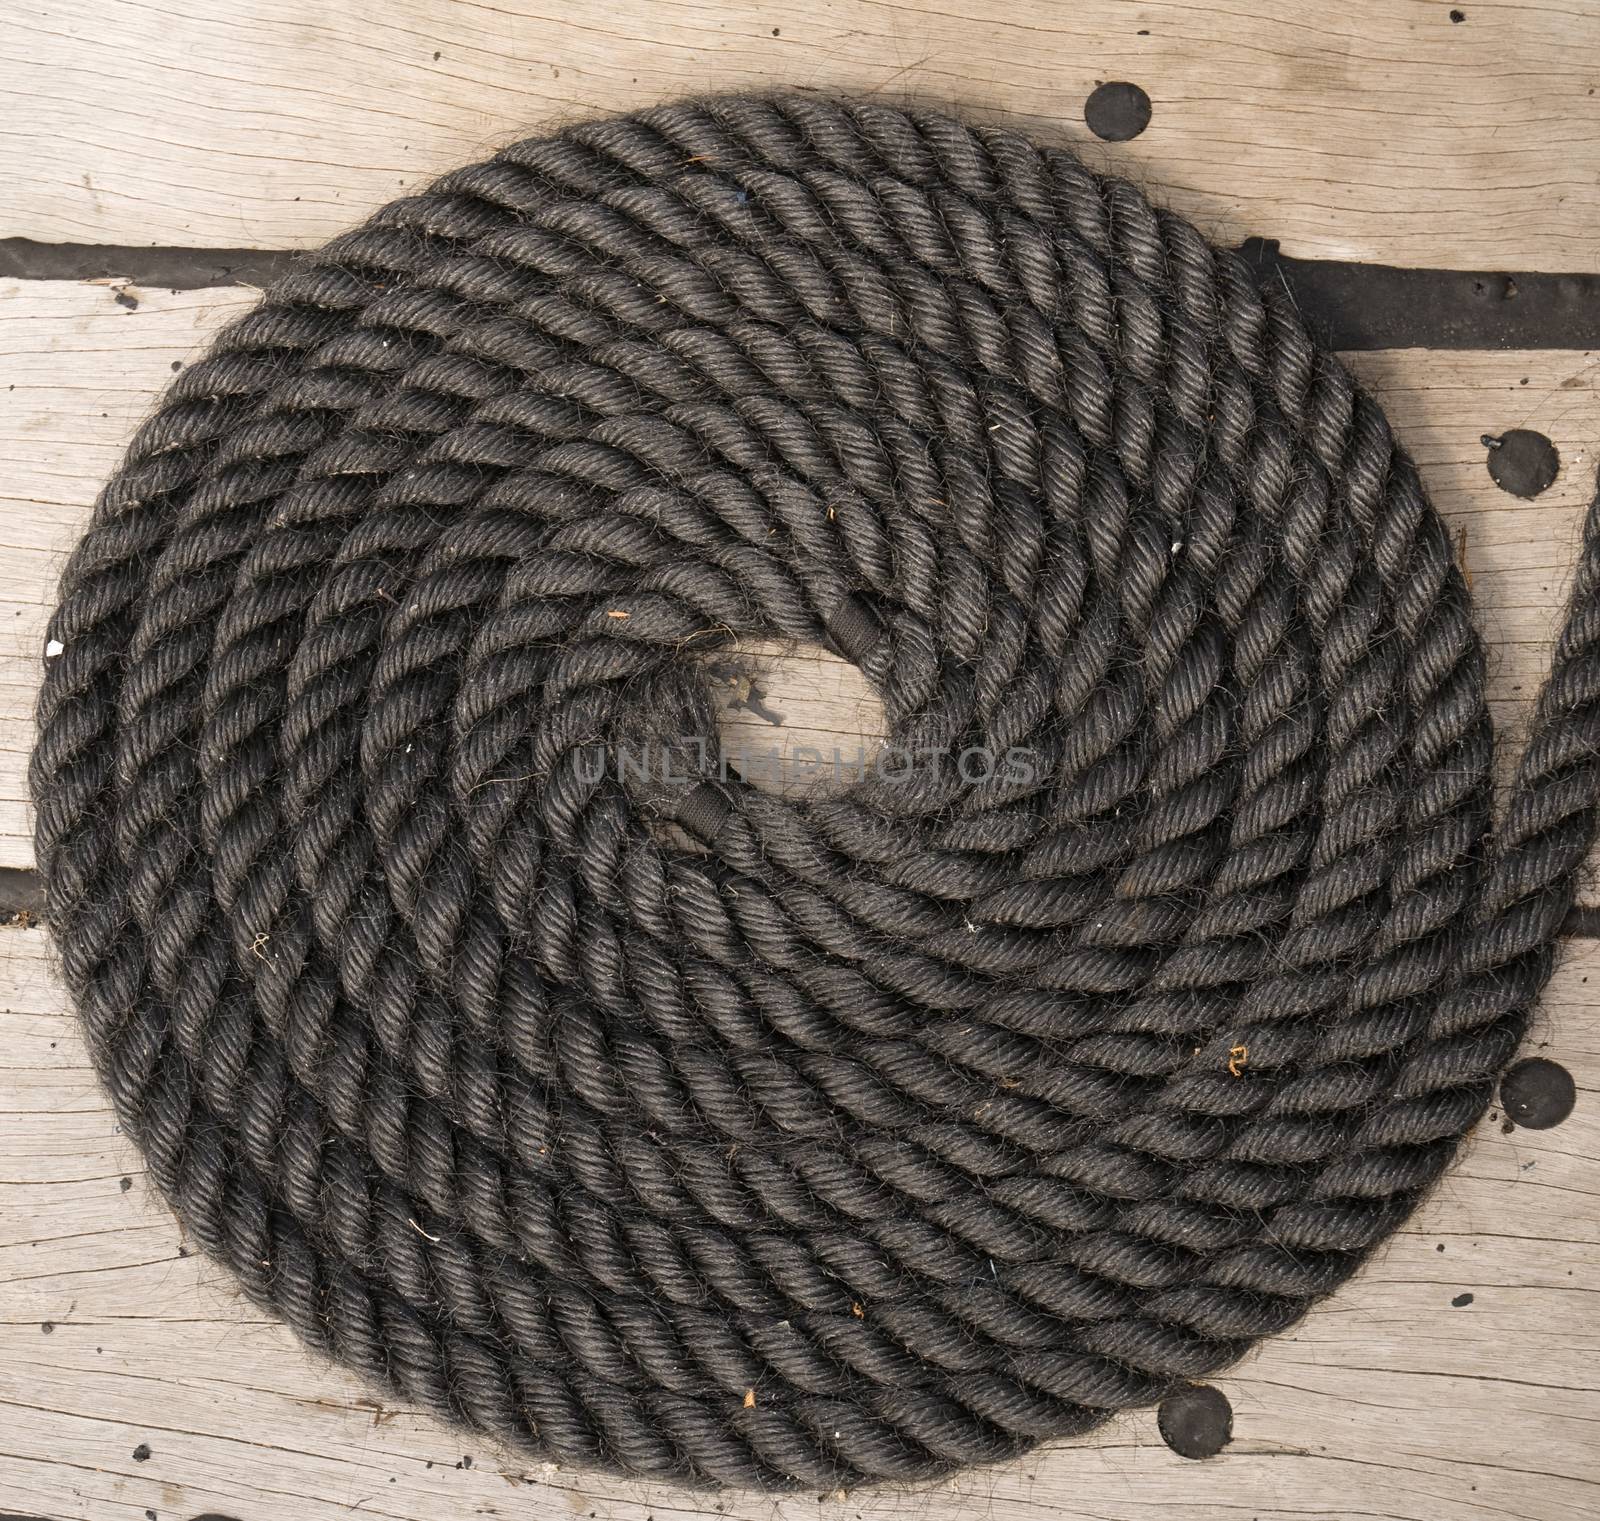 Rope Coil by TimAwe